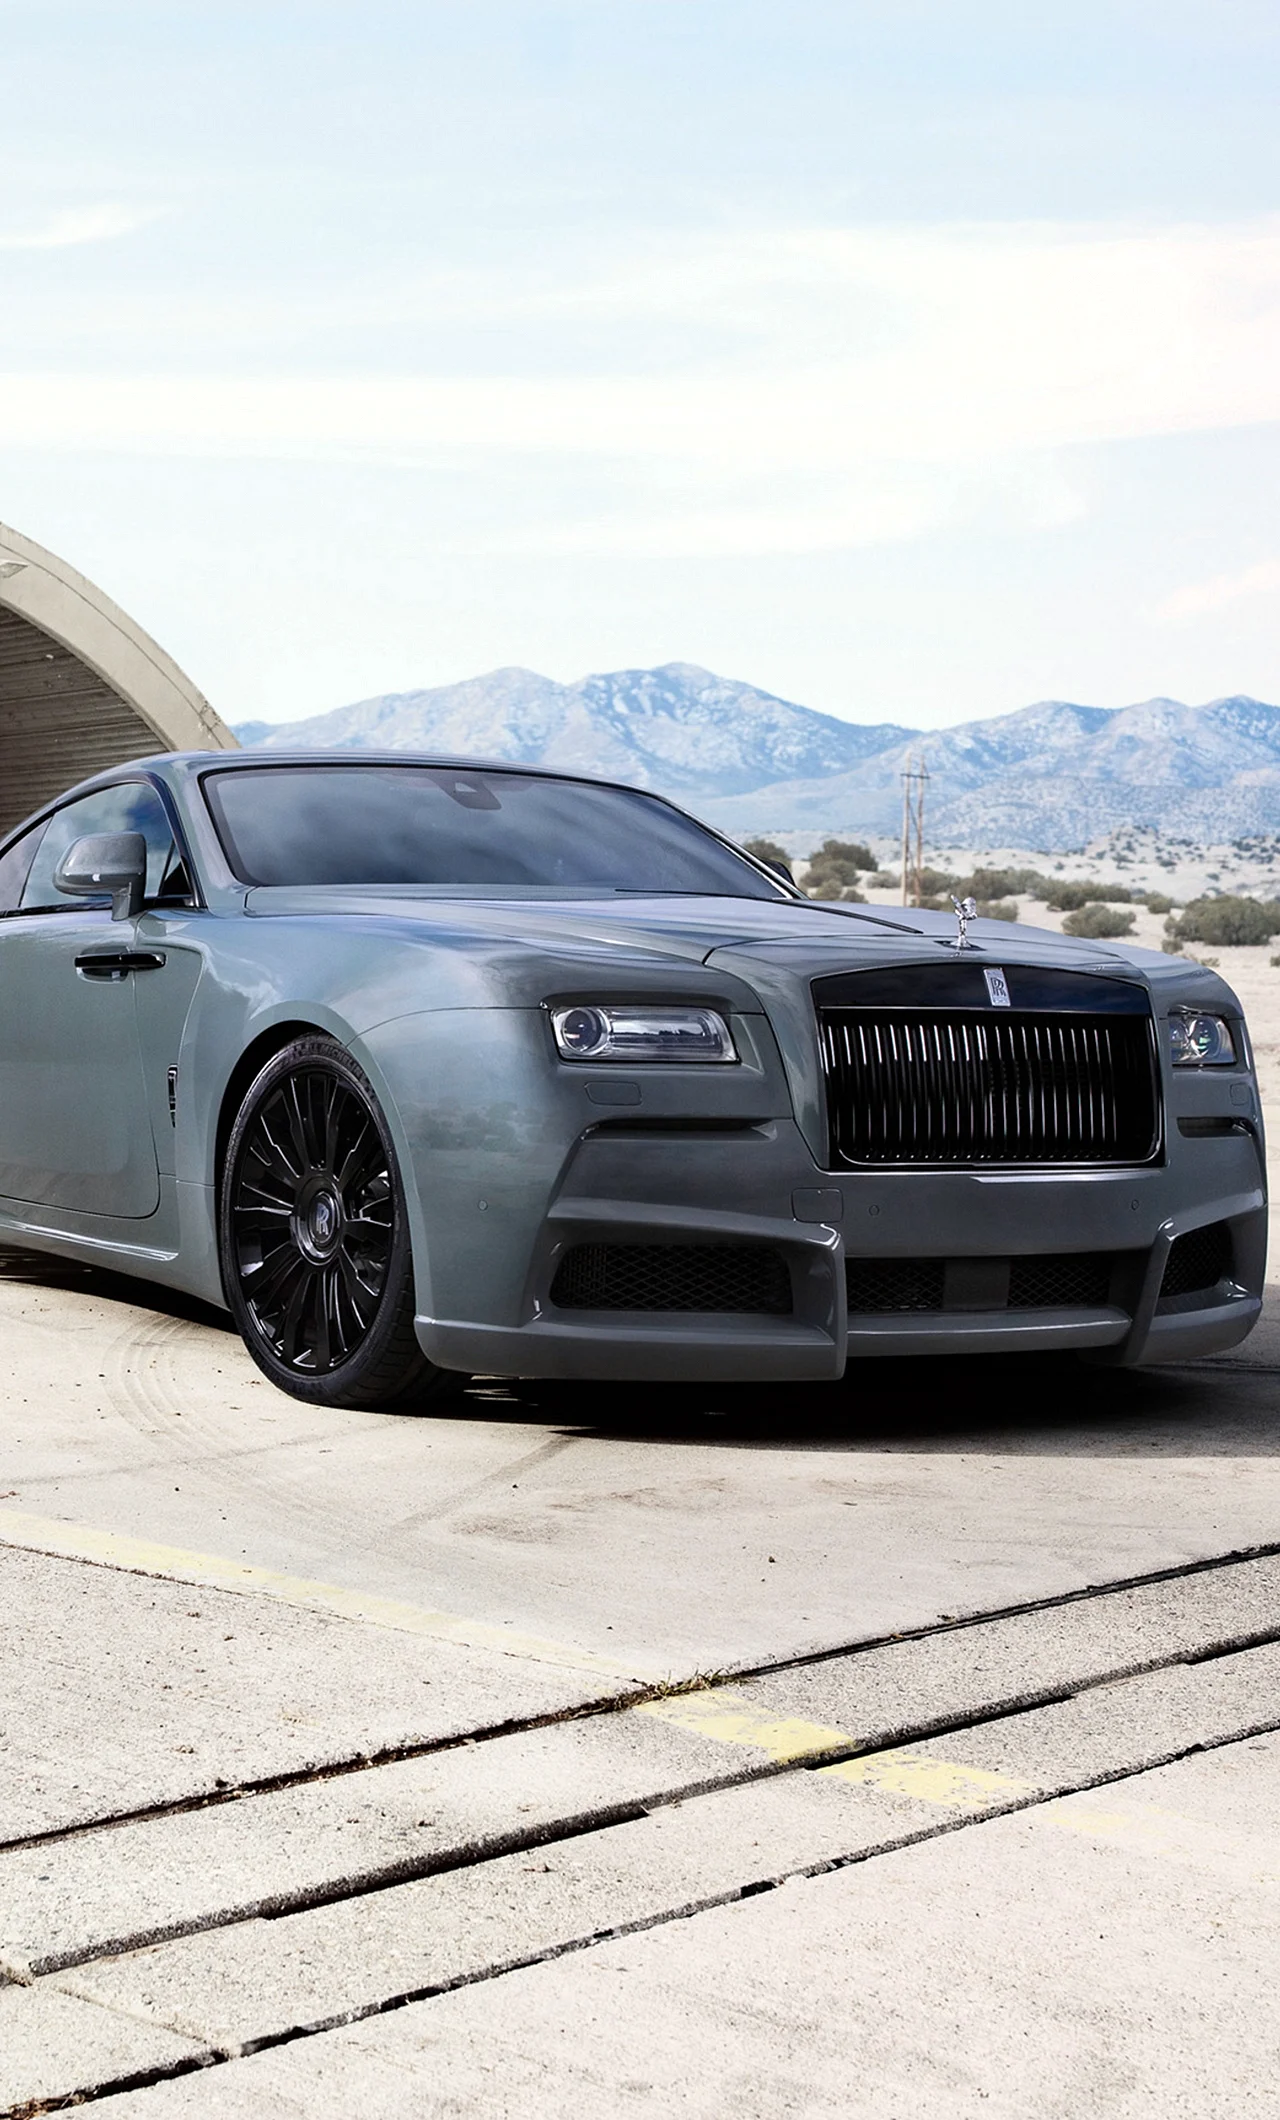 Rolls Royce Wraith Wallpaper For iPhone